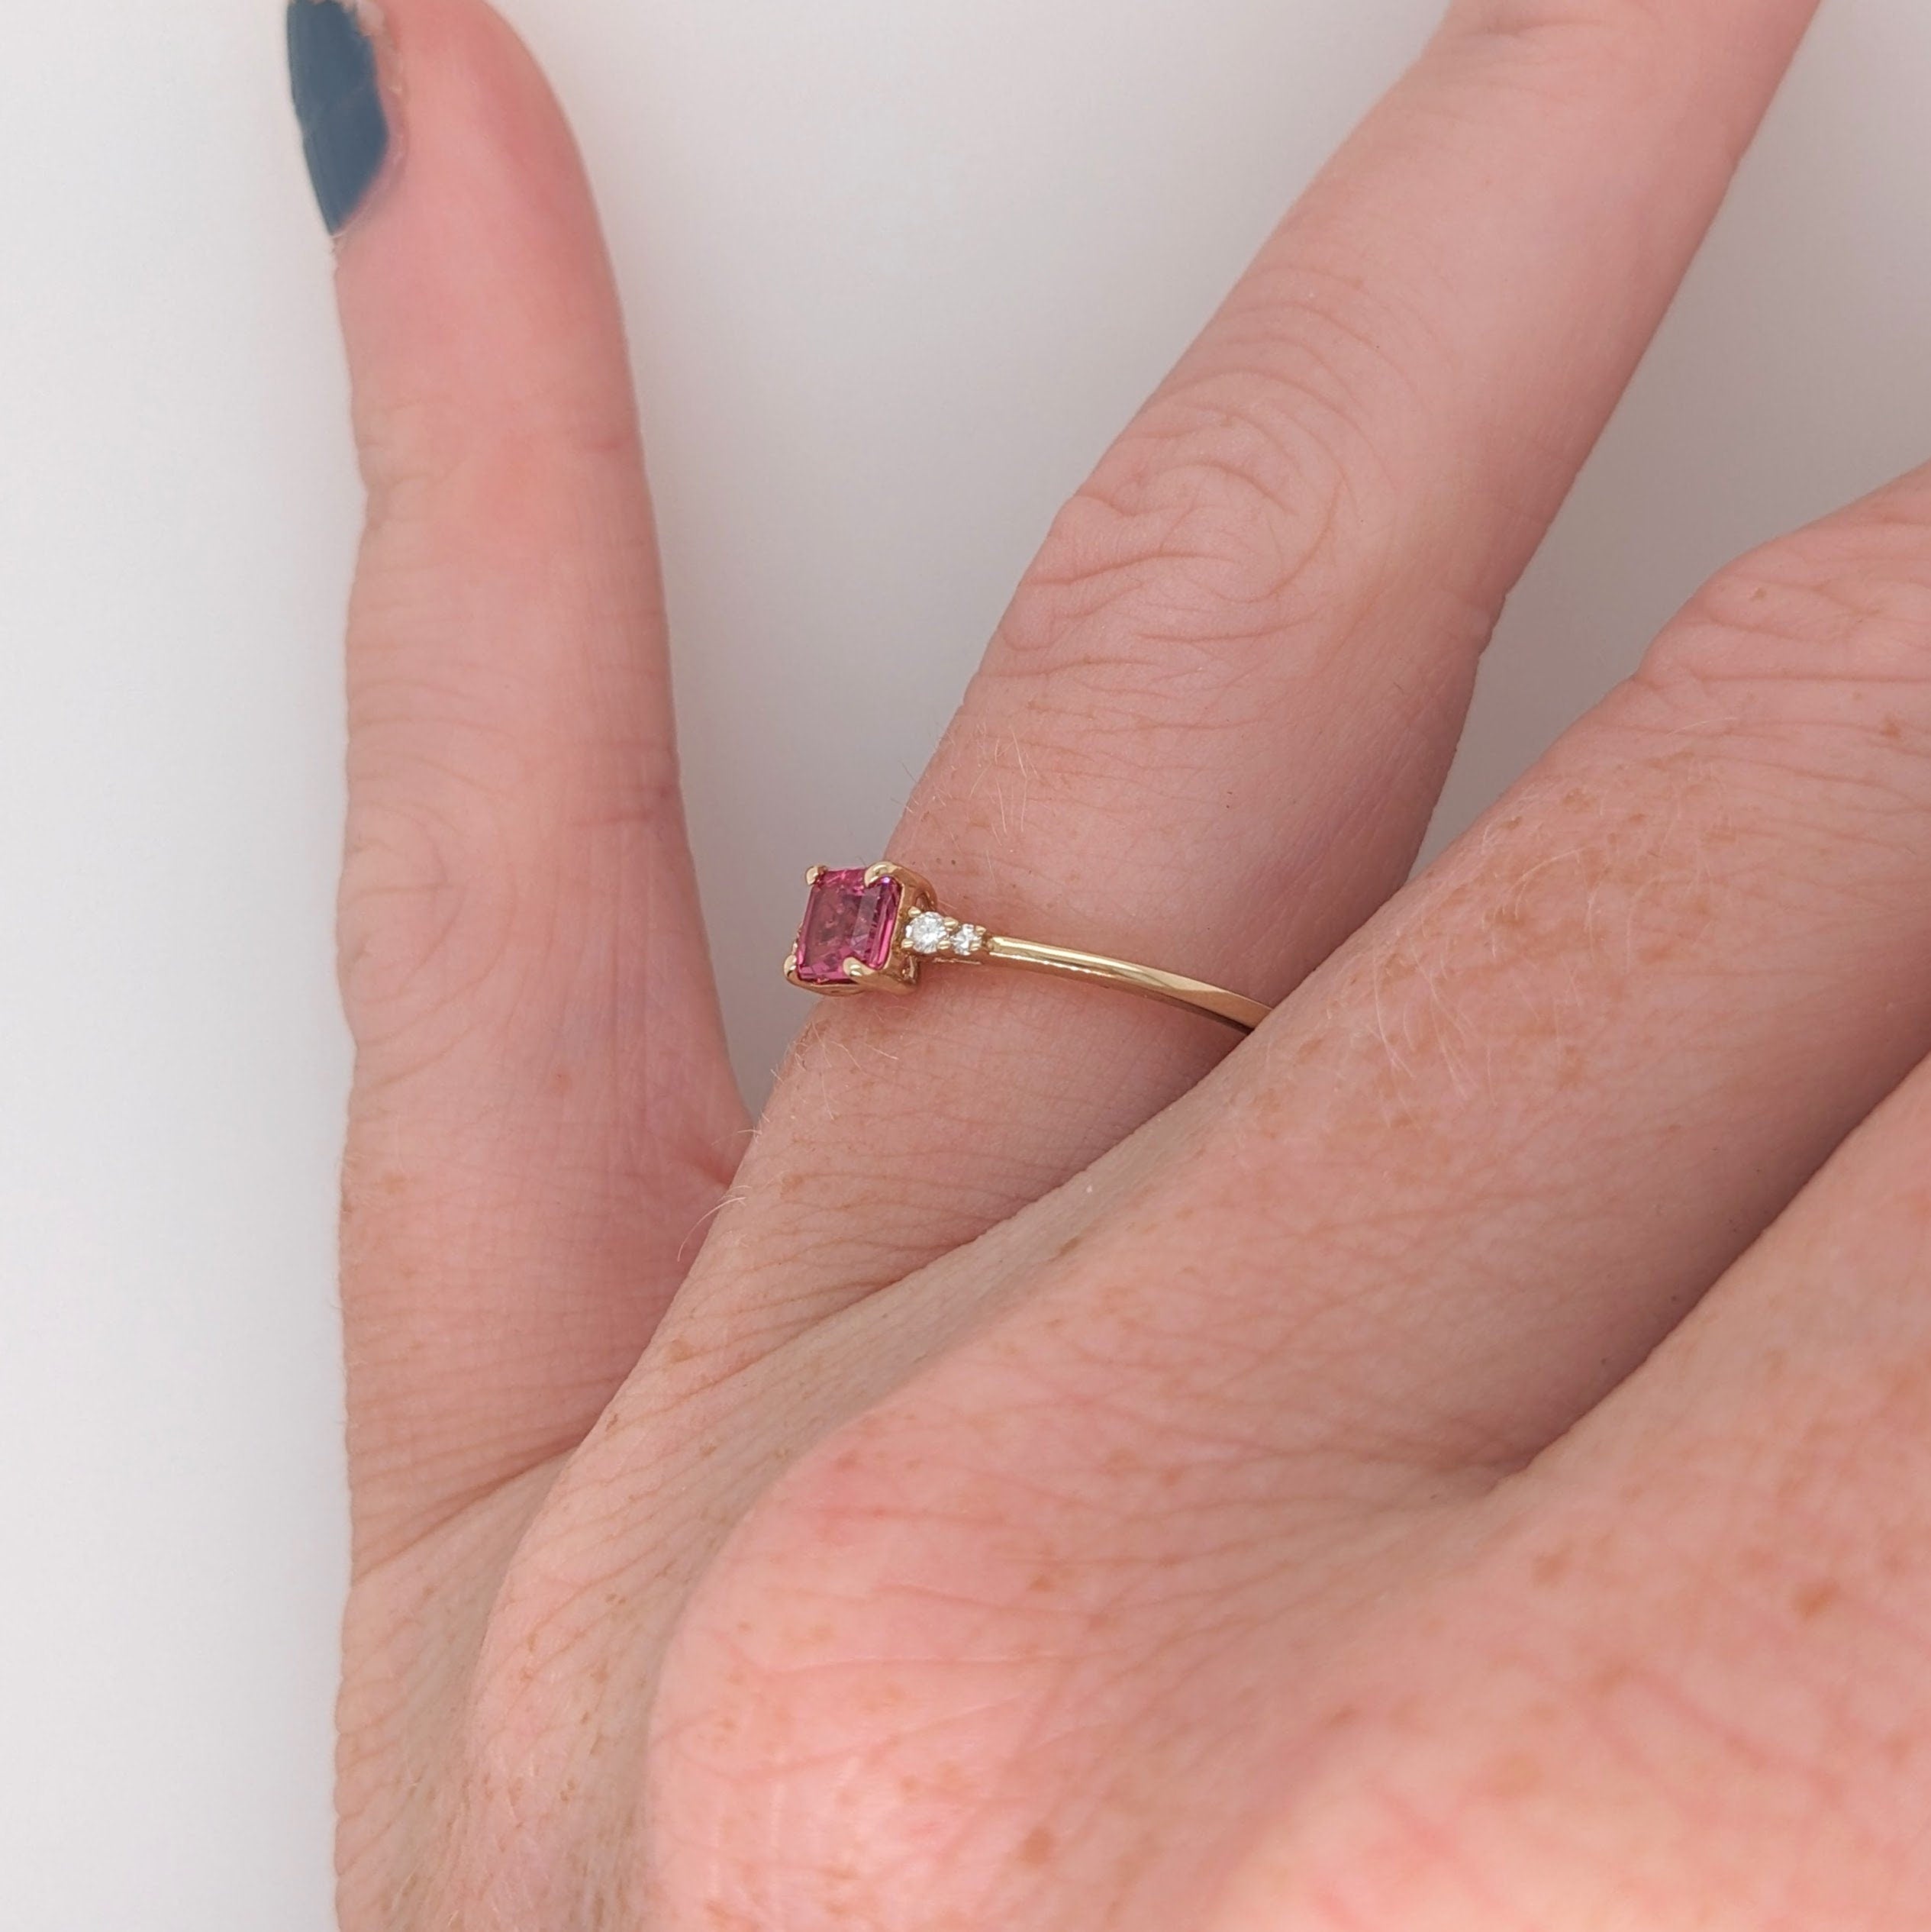 Dainty Princess Cut Red Spinel Ring in Solid 14K Yellow Gold with Natural Diamond Accents | 4mm | October Birthstone | Prongs | Daily Wear